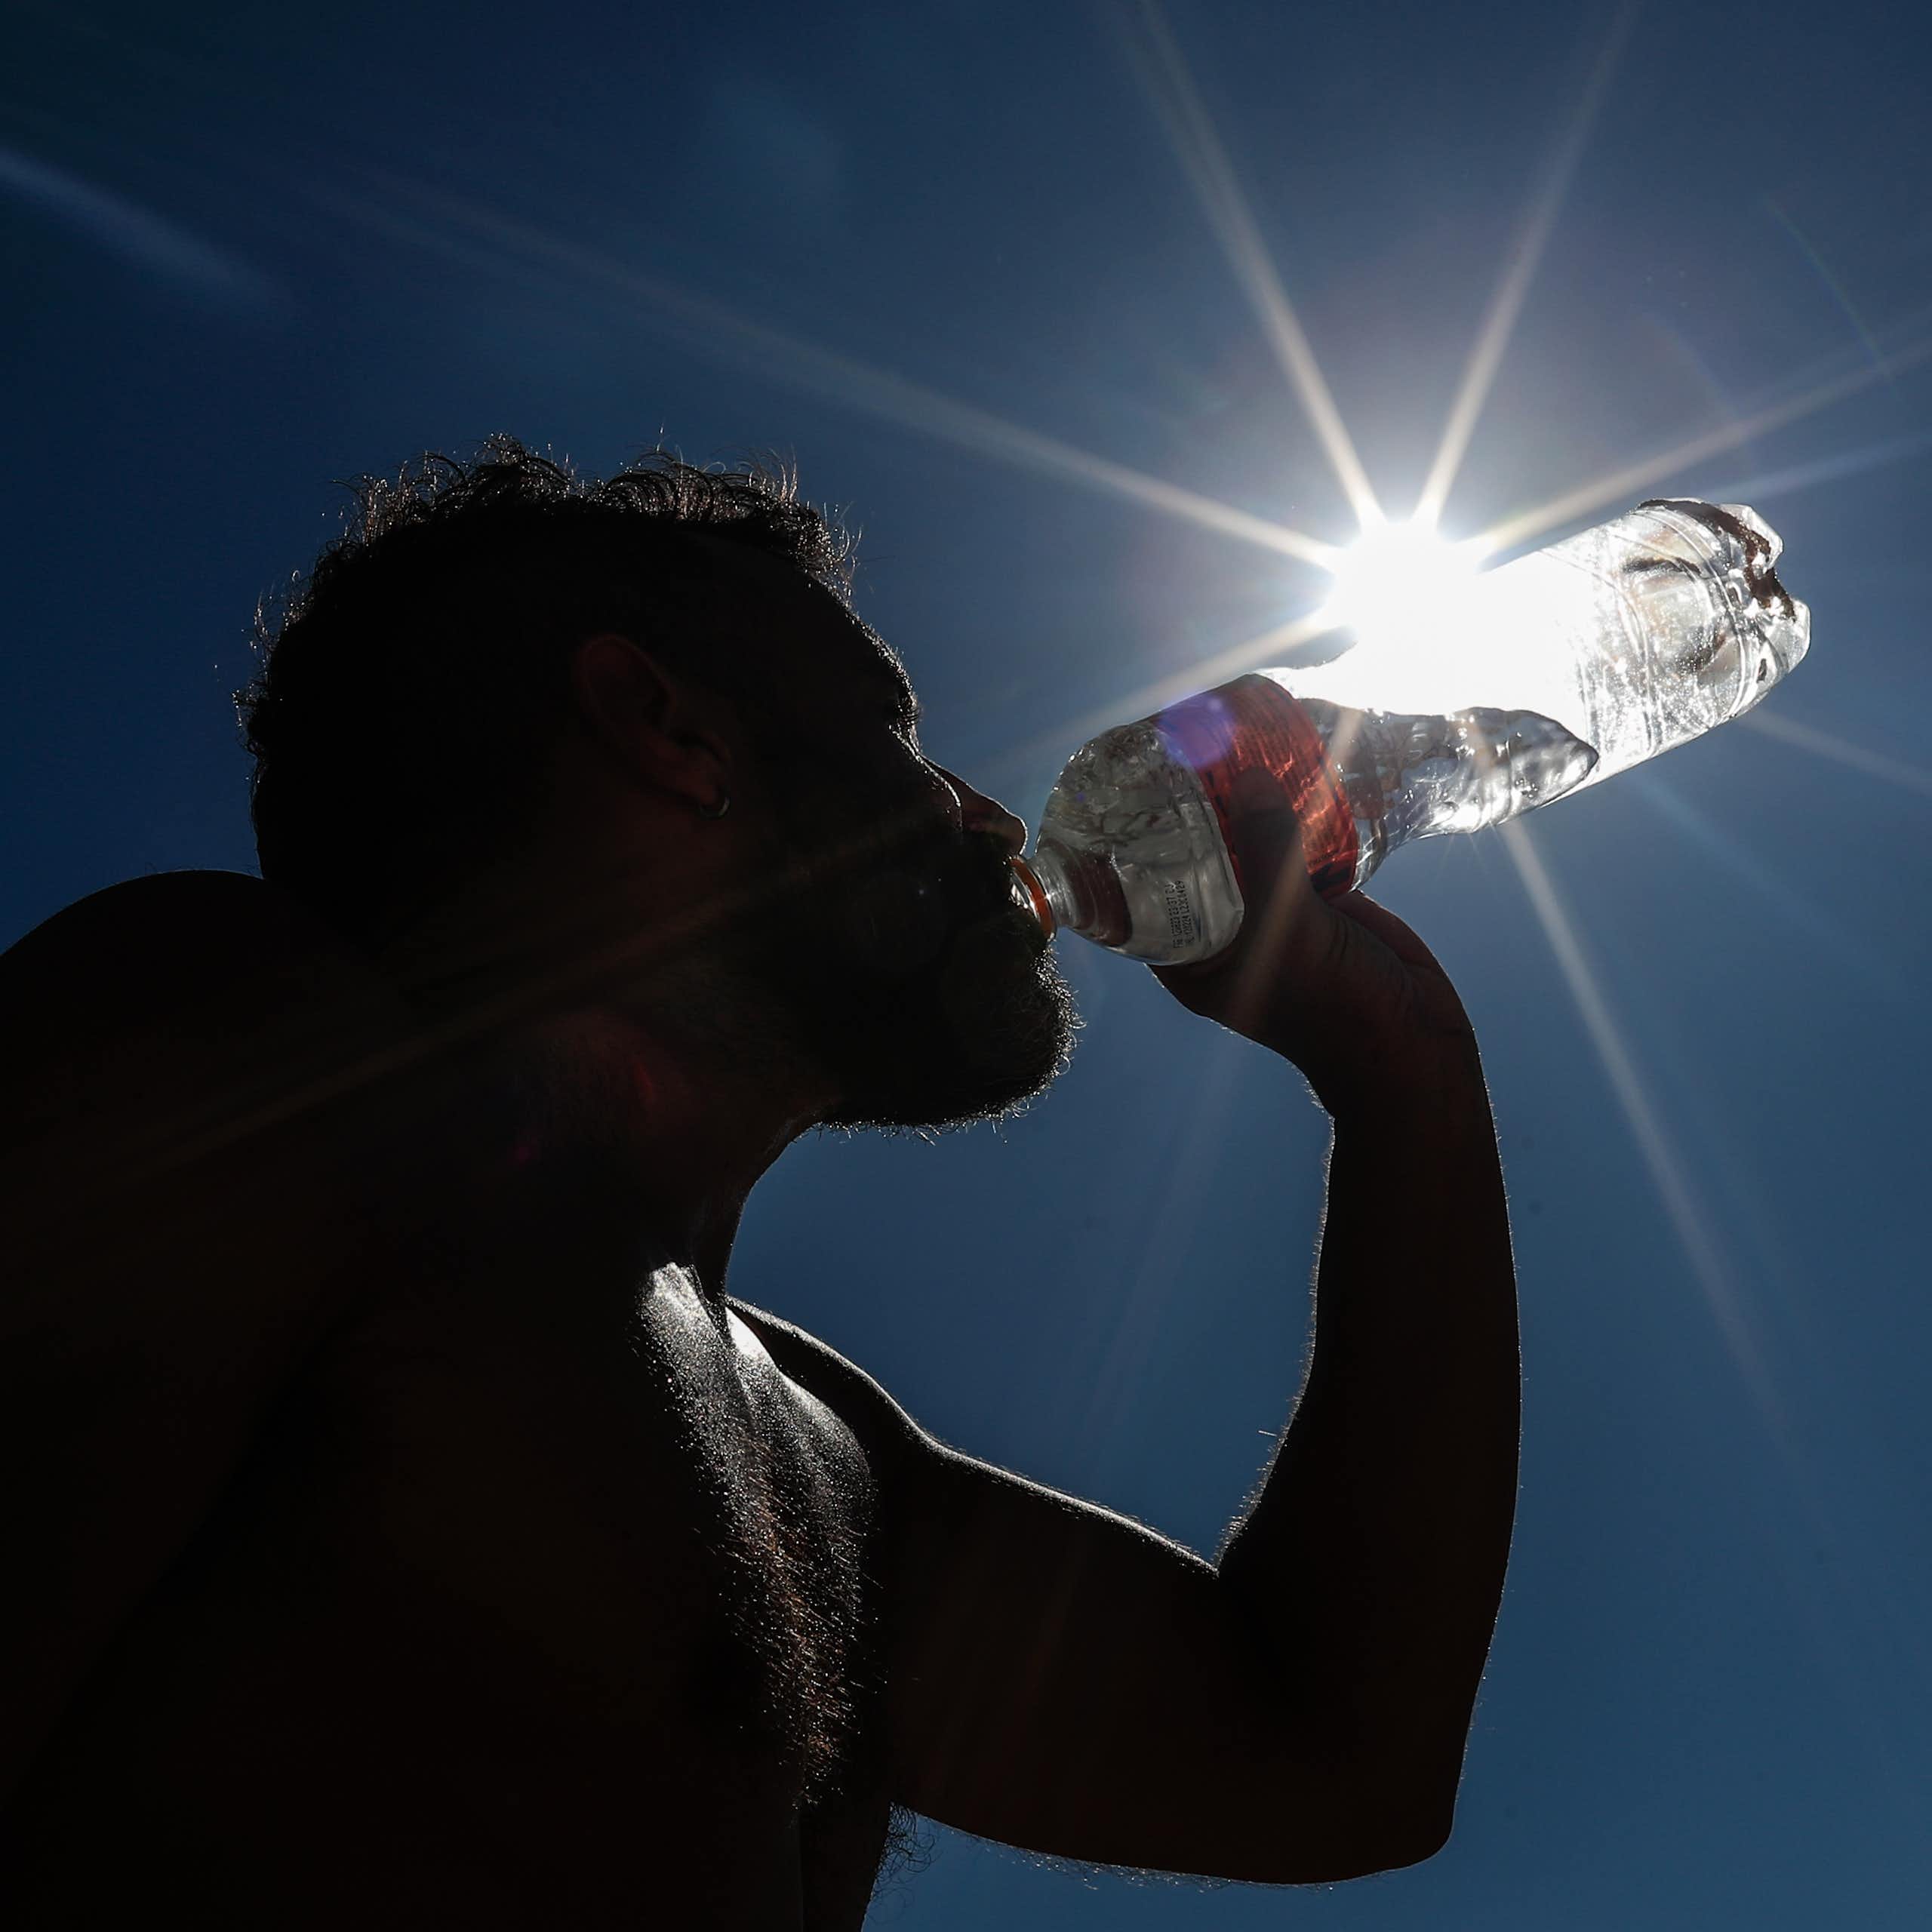 A silhouette of someone drinking water from a plastic bottle.